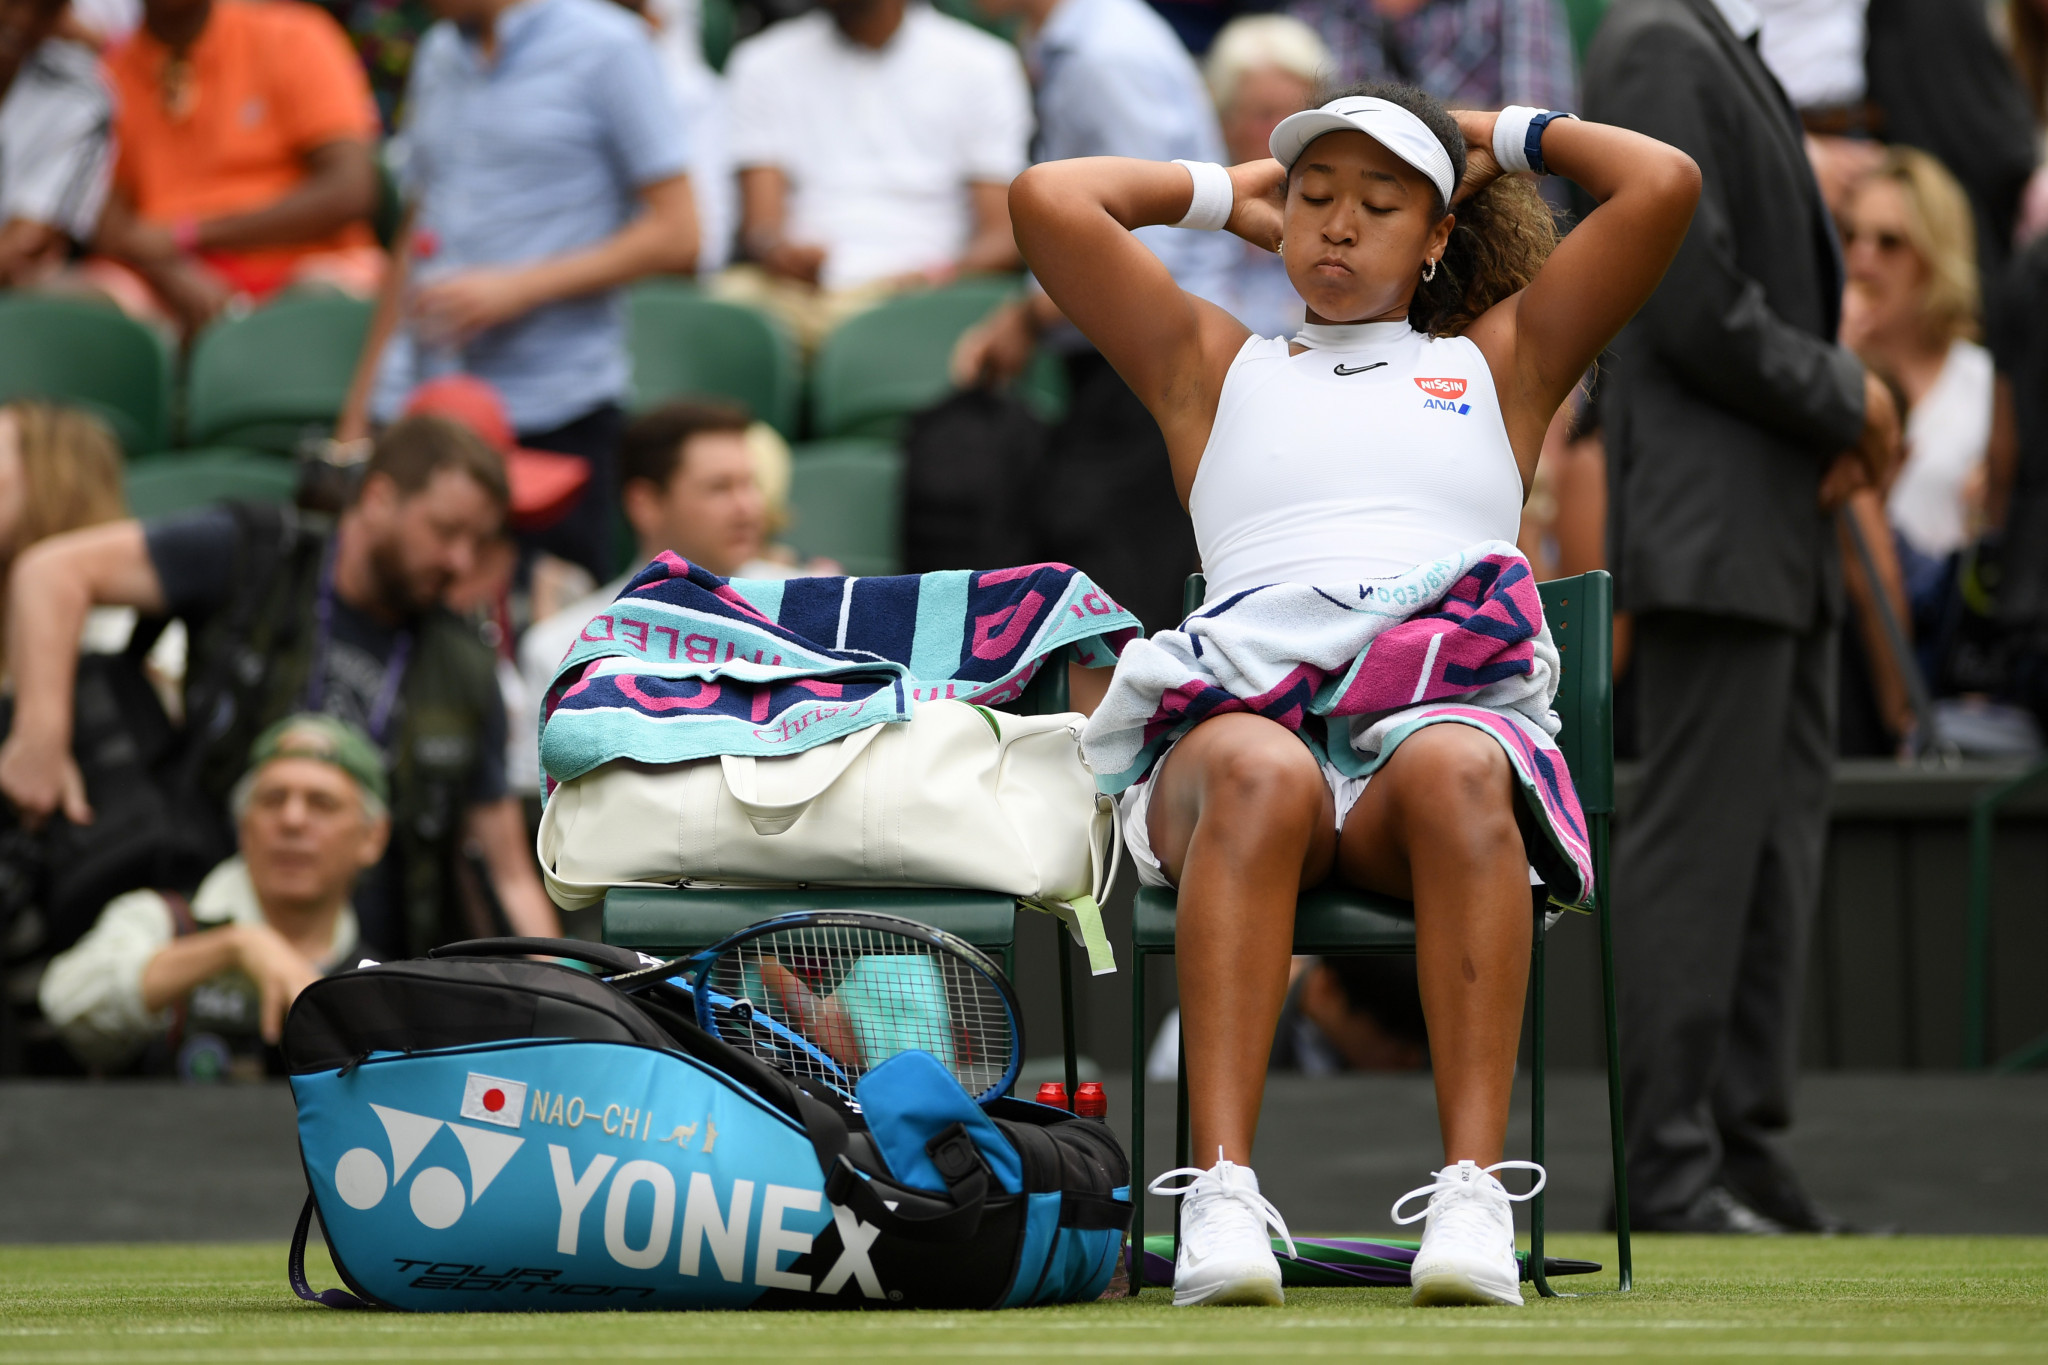 Naomi Osaka made a shock first round exit at Wimbledon ©Getty Images